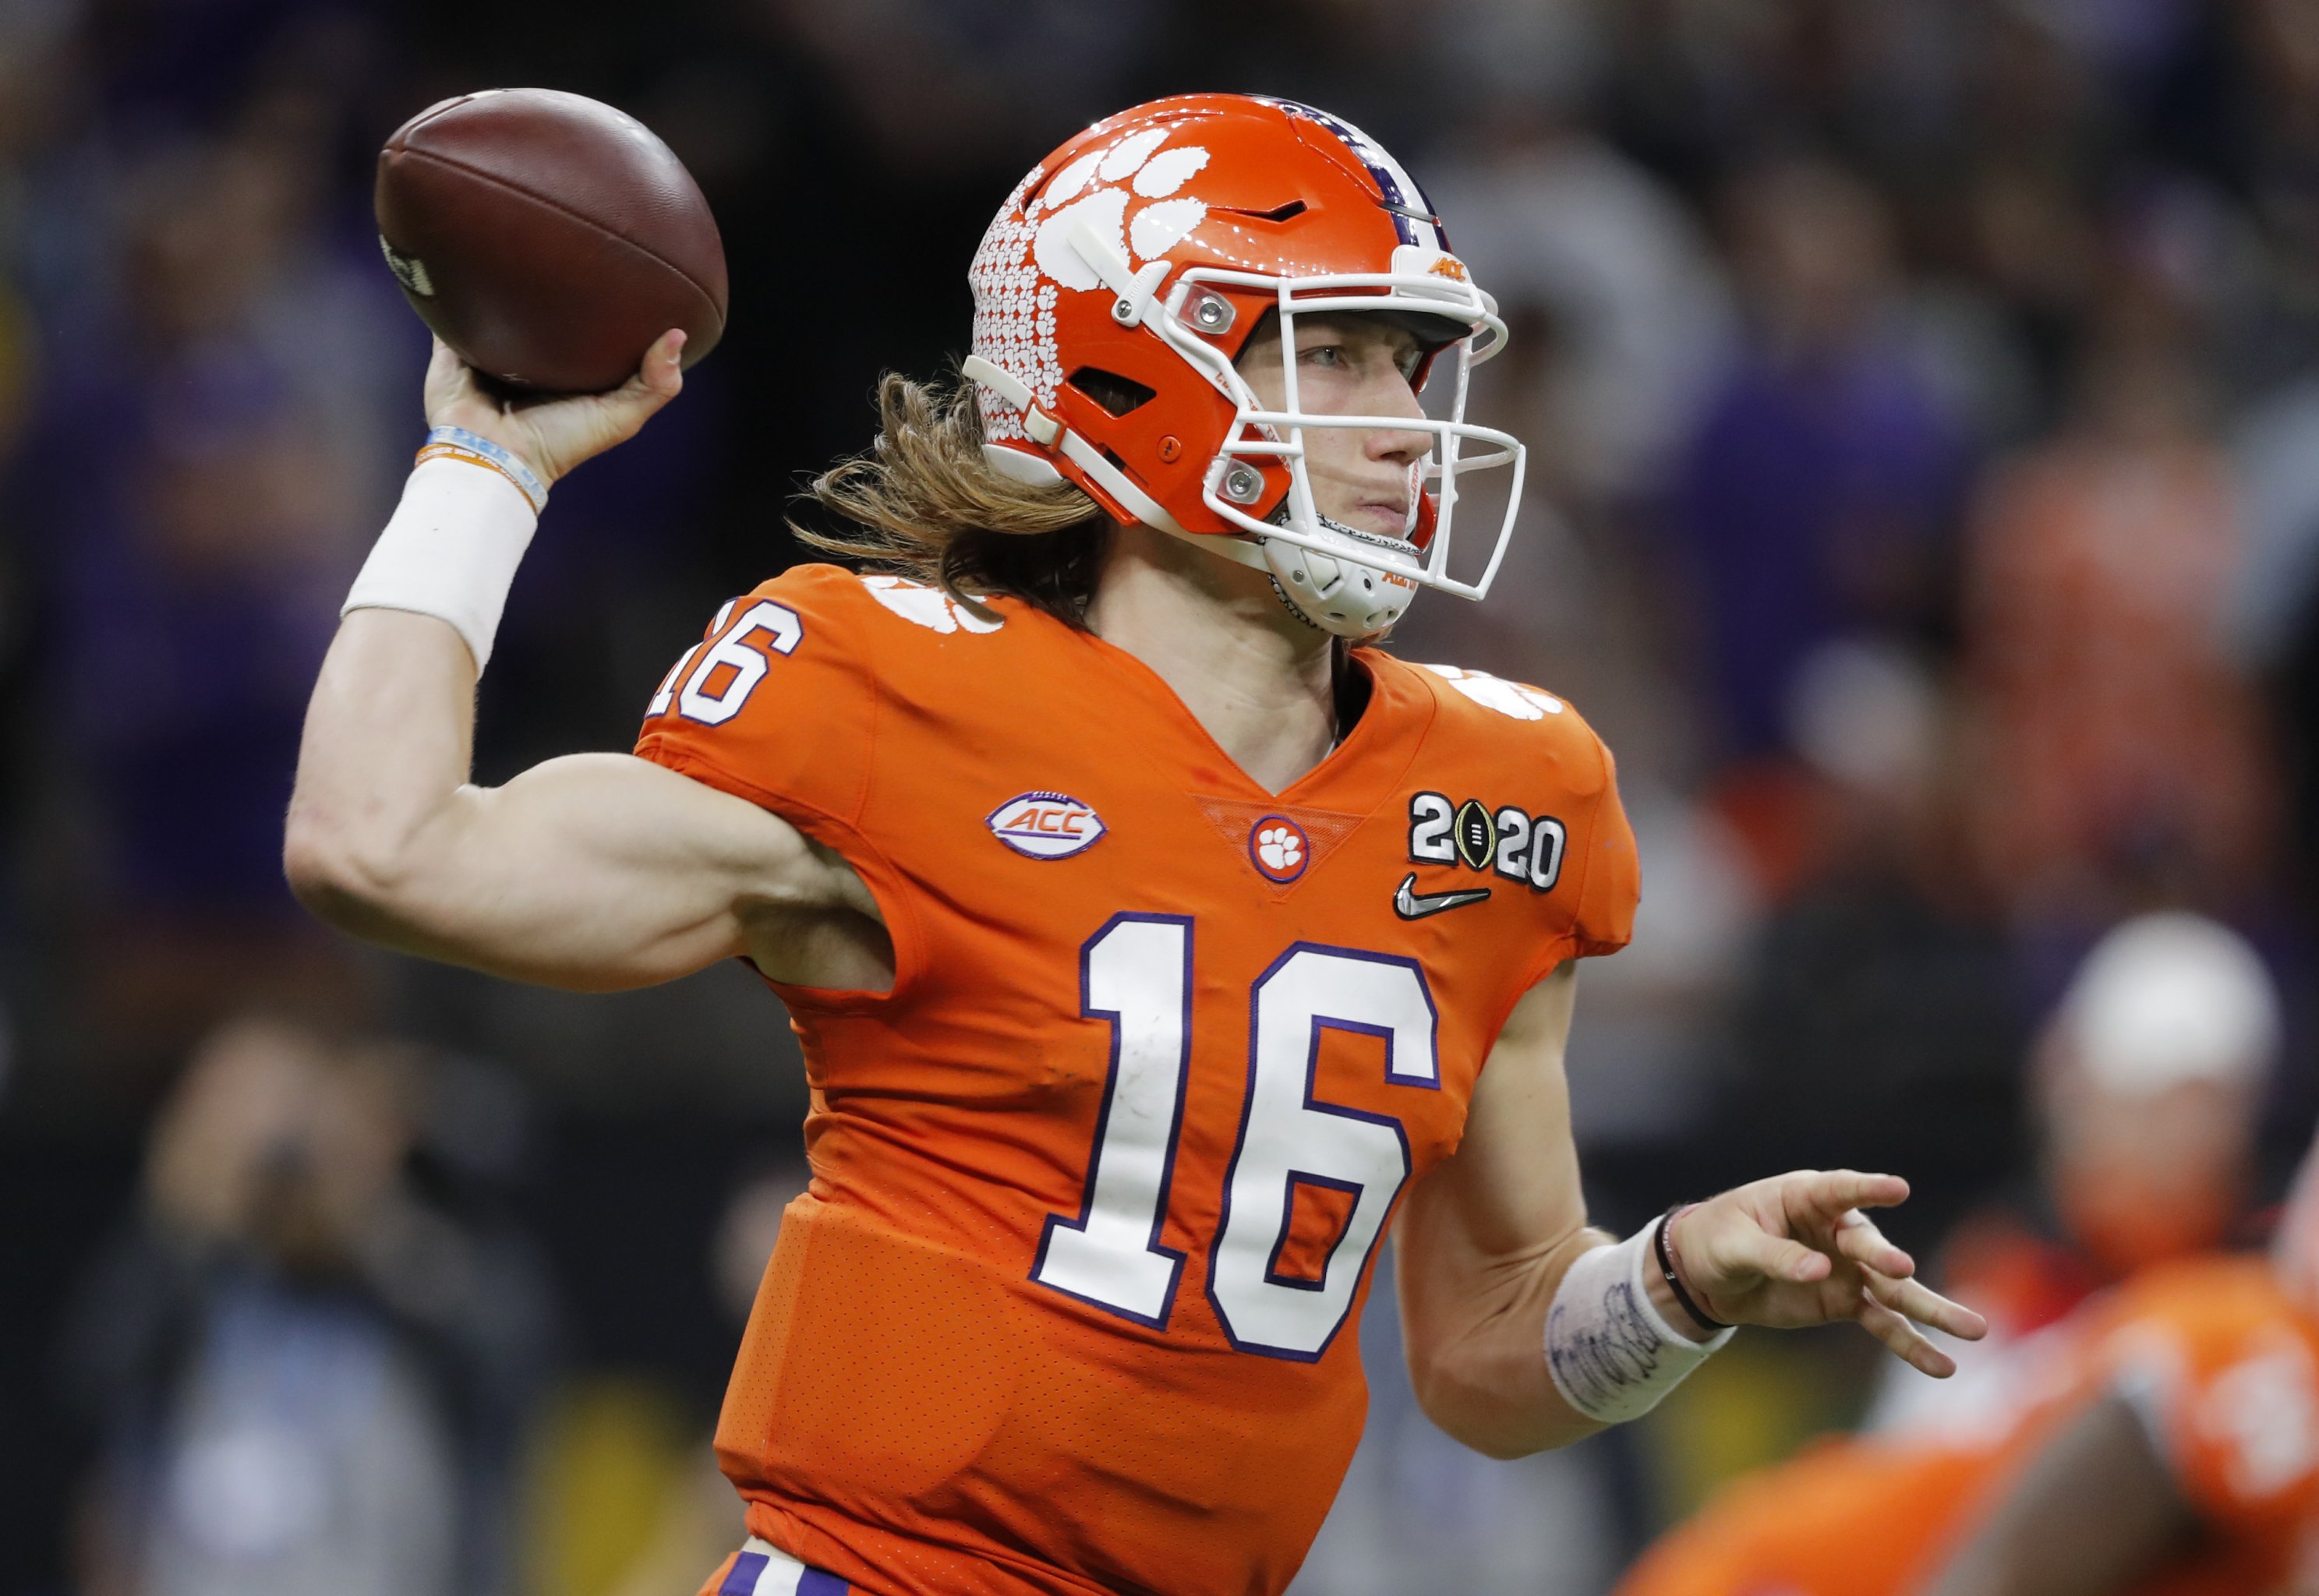 Ranking the Top 10 Quarterbacks Eligible for the 2021 NFL Draft